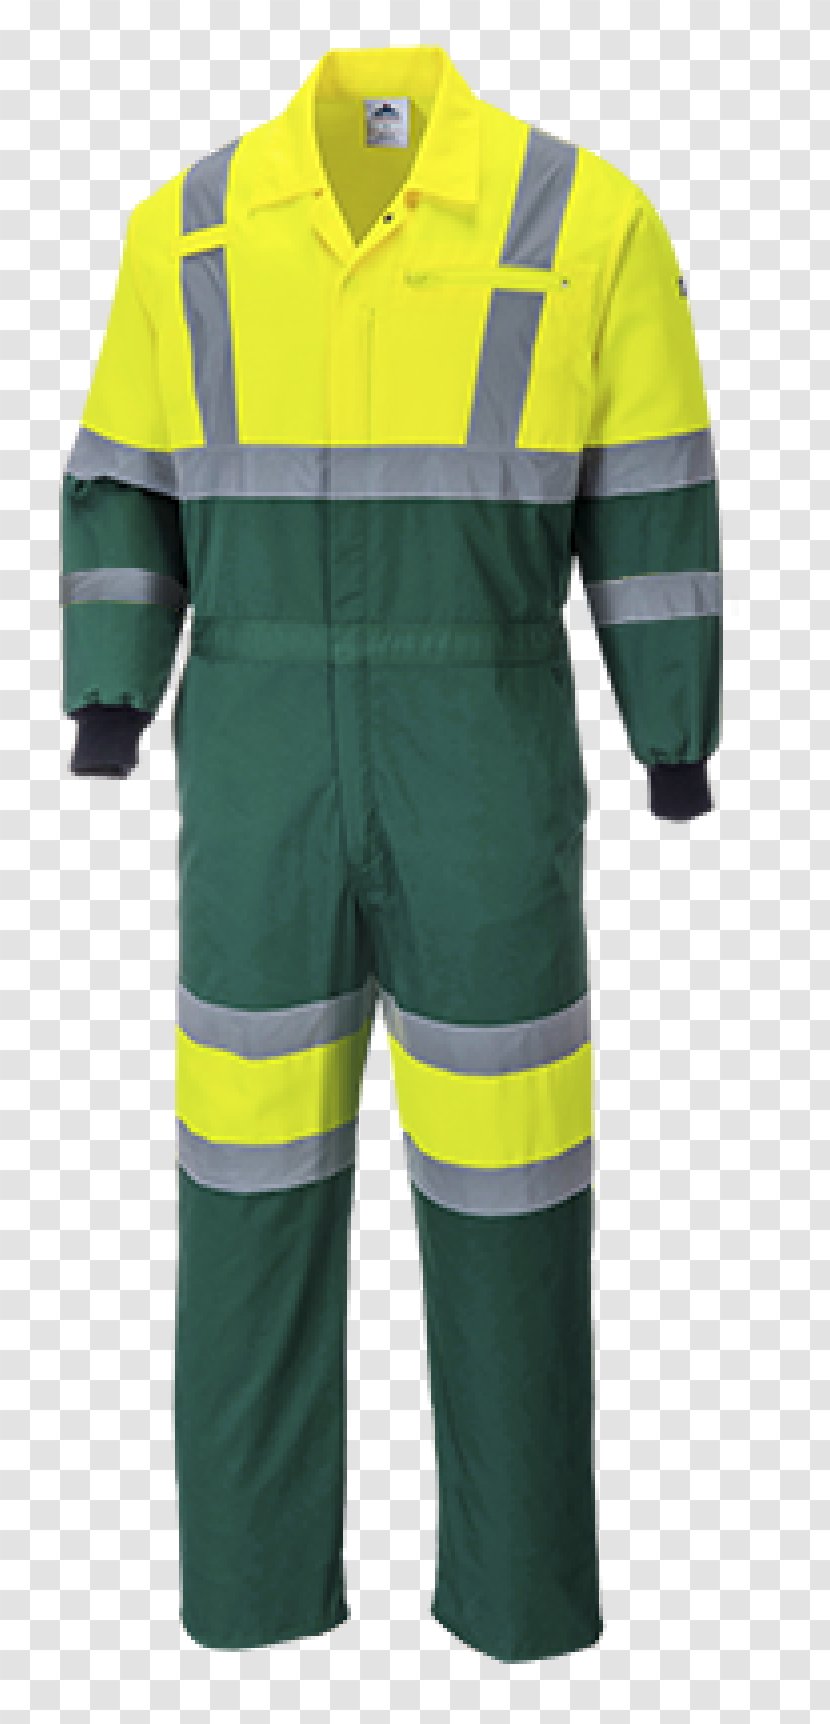 High-visibility Clothing Overall Boilersuit Workwear - Coat - Sportswear Transparent PNG